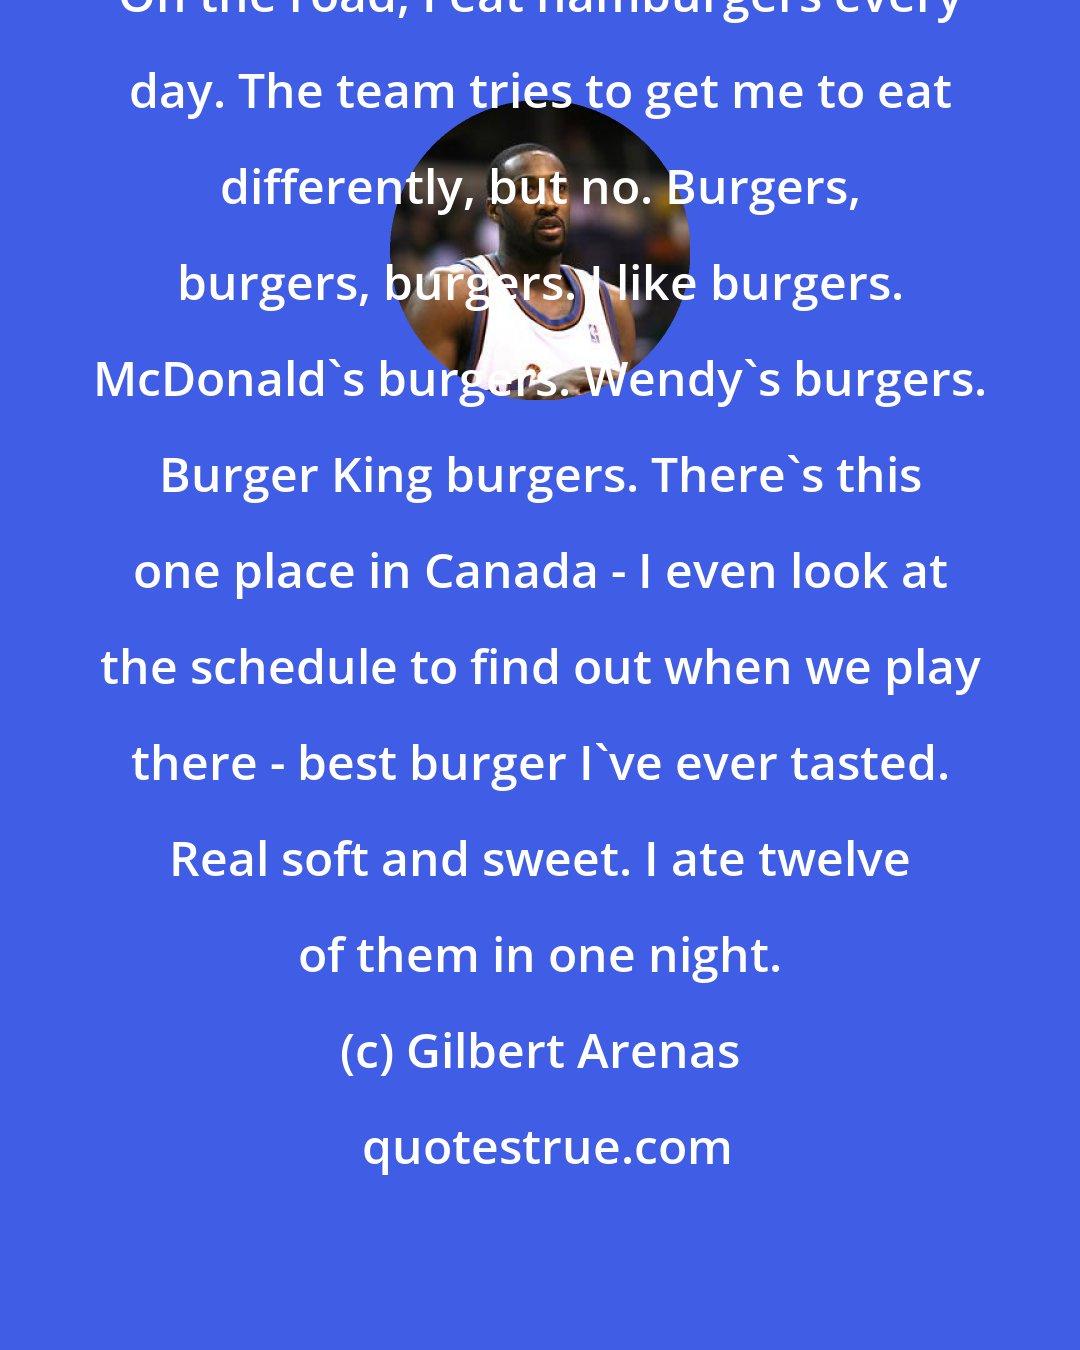 Gilbert Arenas: On the road, I eat hamburgers every day. The team tries to get me to eat differently, but no. Burgers, burgers, burgers. I like burgers. McDonald's burgers. Wendy's burgers. Burger King burgers. There's this one place in Canada - I even look at the schedule to find out when we play there - best burger I've ever tasted. Real soft and sweet. I ate twelve of them in one night.